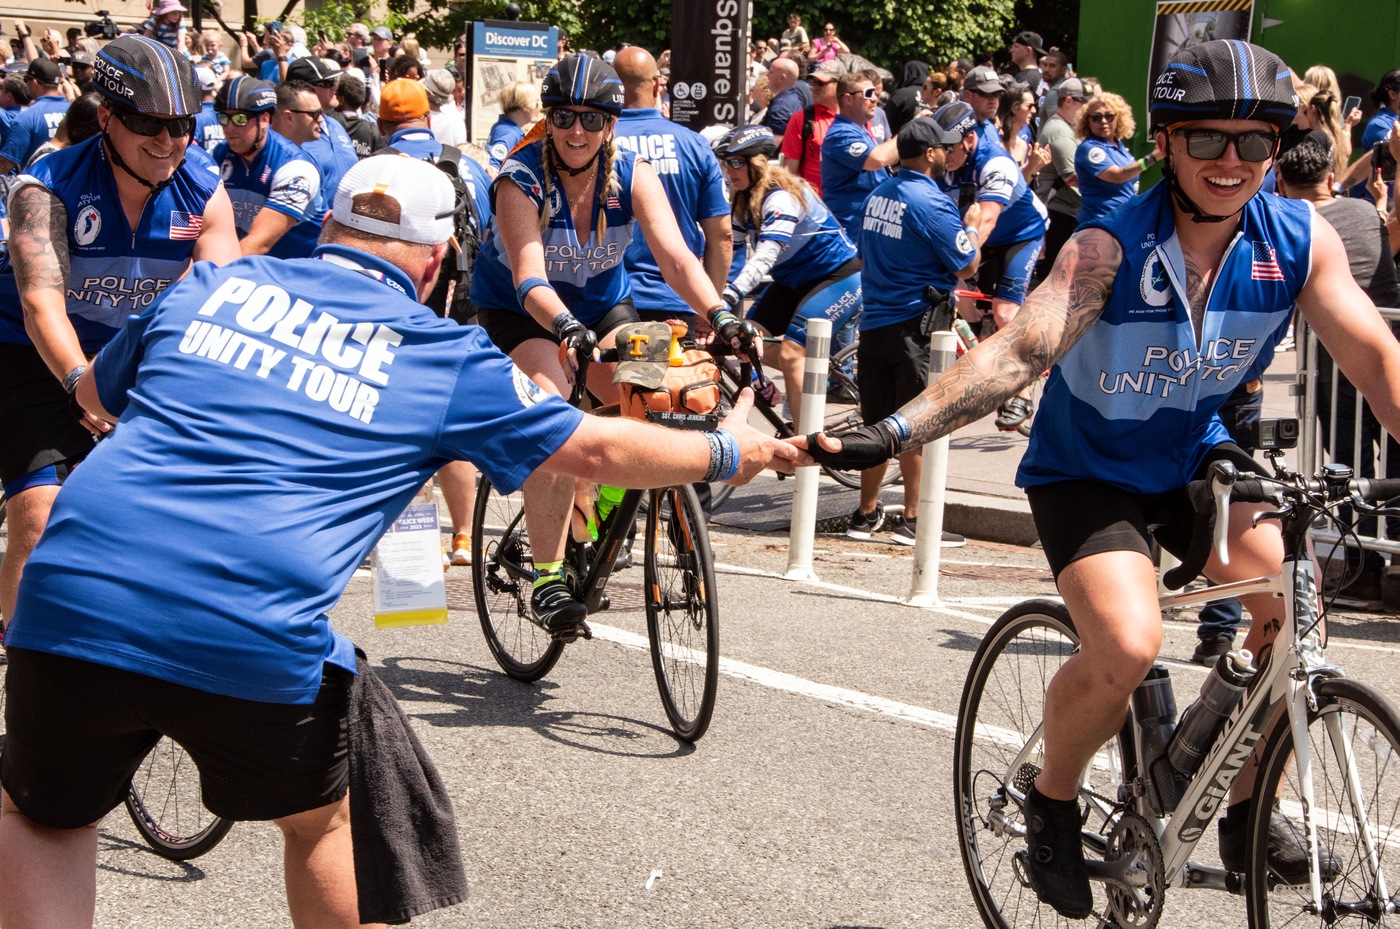 Riders in the Police Unity Tour receive a welcome on May 13, 2023, in Washington, D.C.